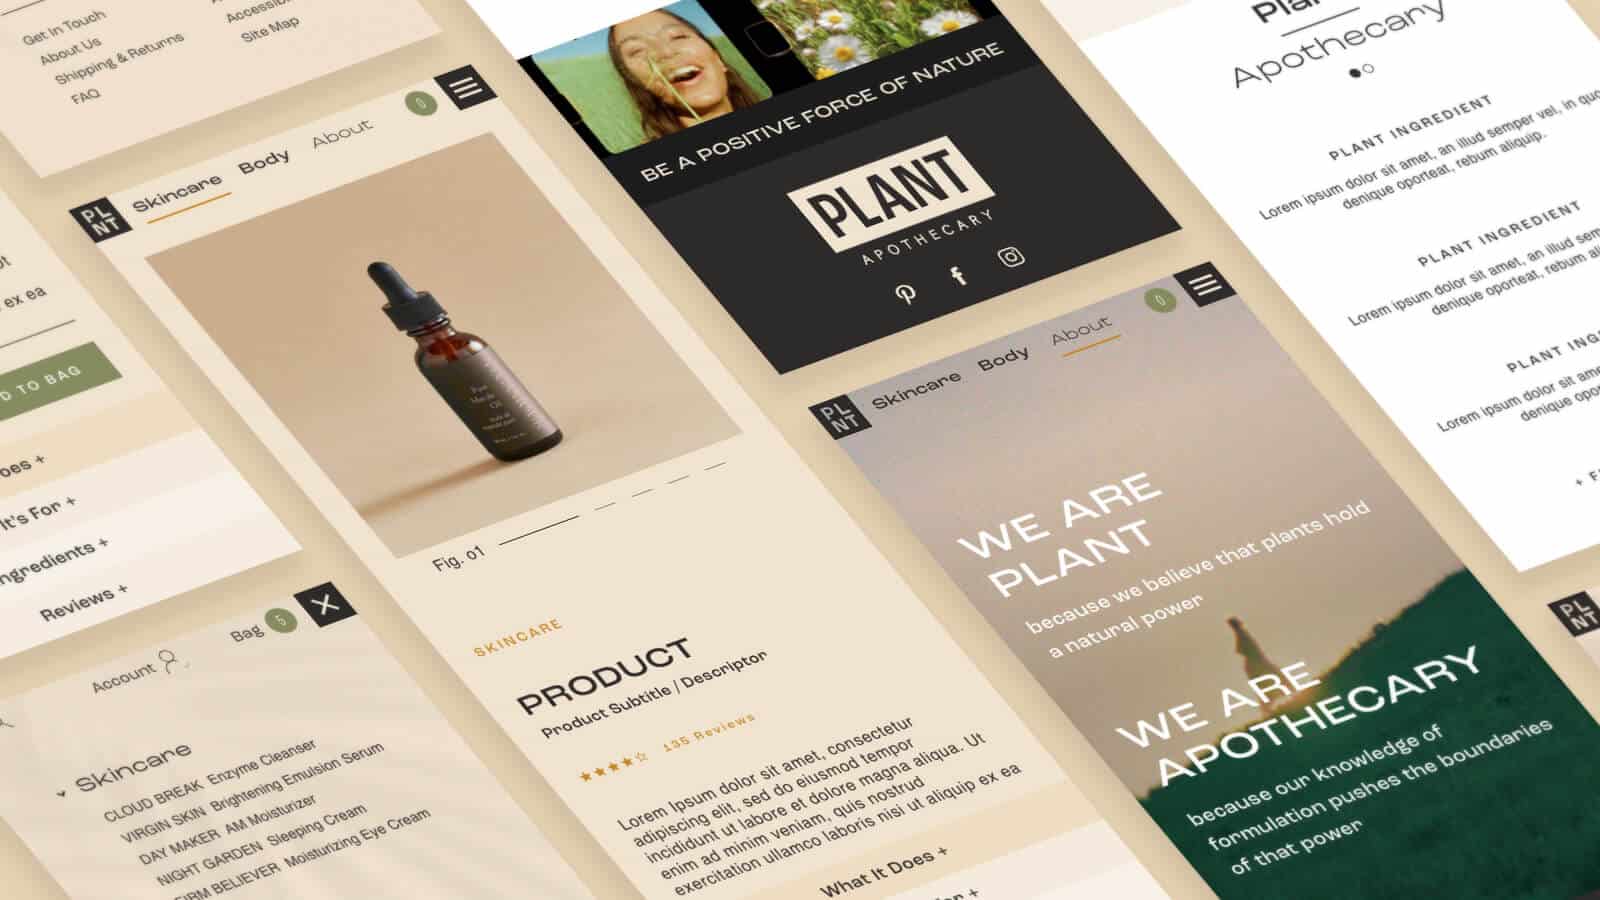 Plant Apothecary mobile-first eCommerce website